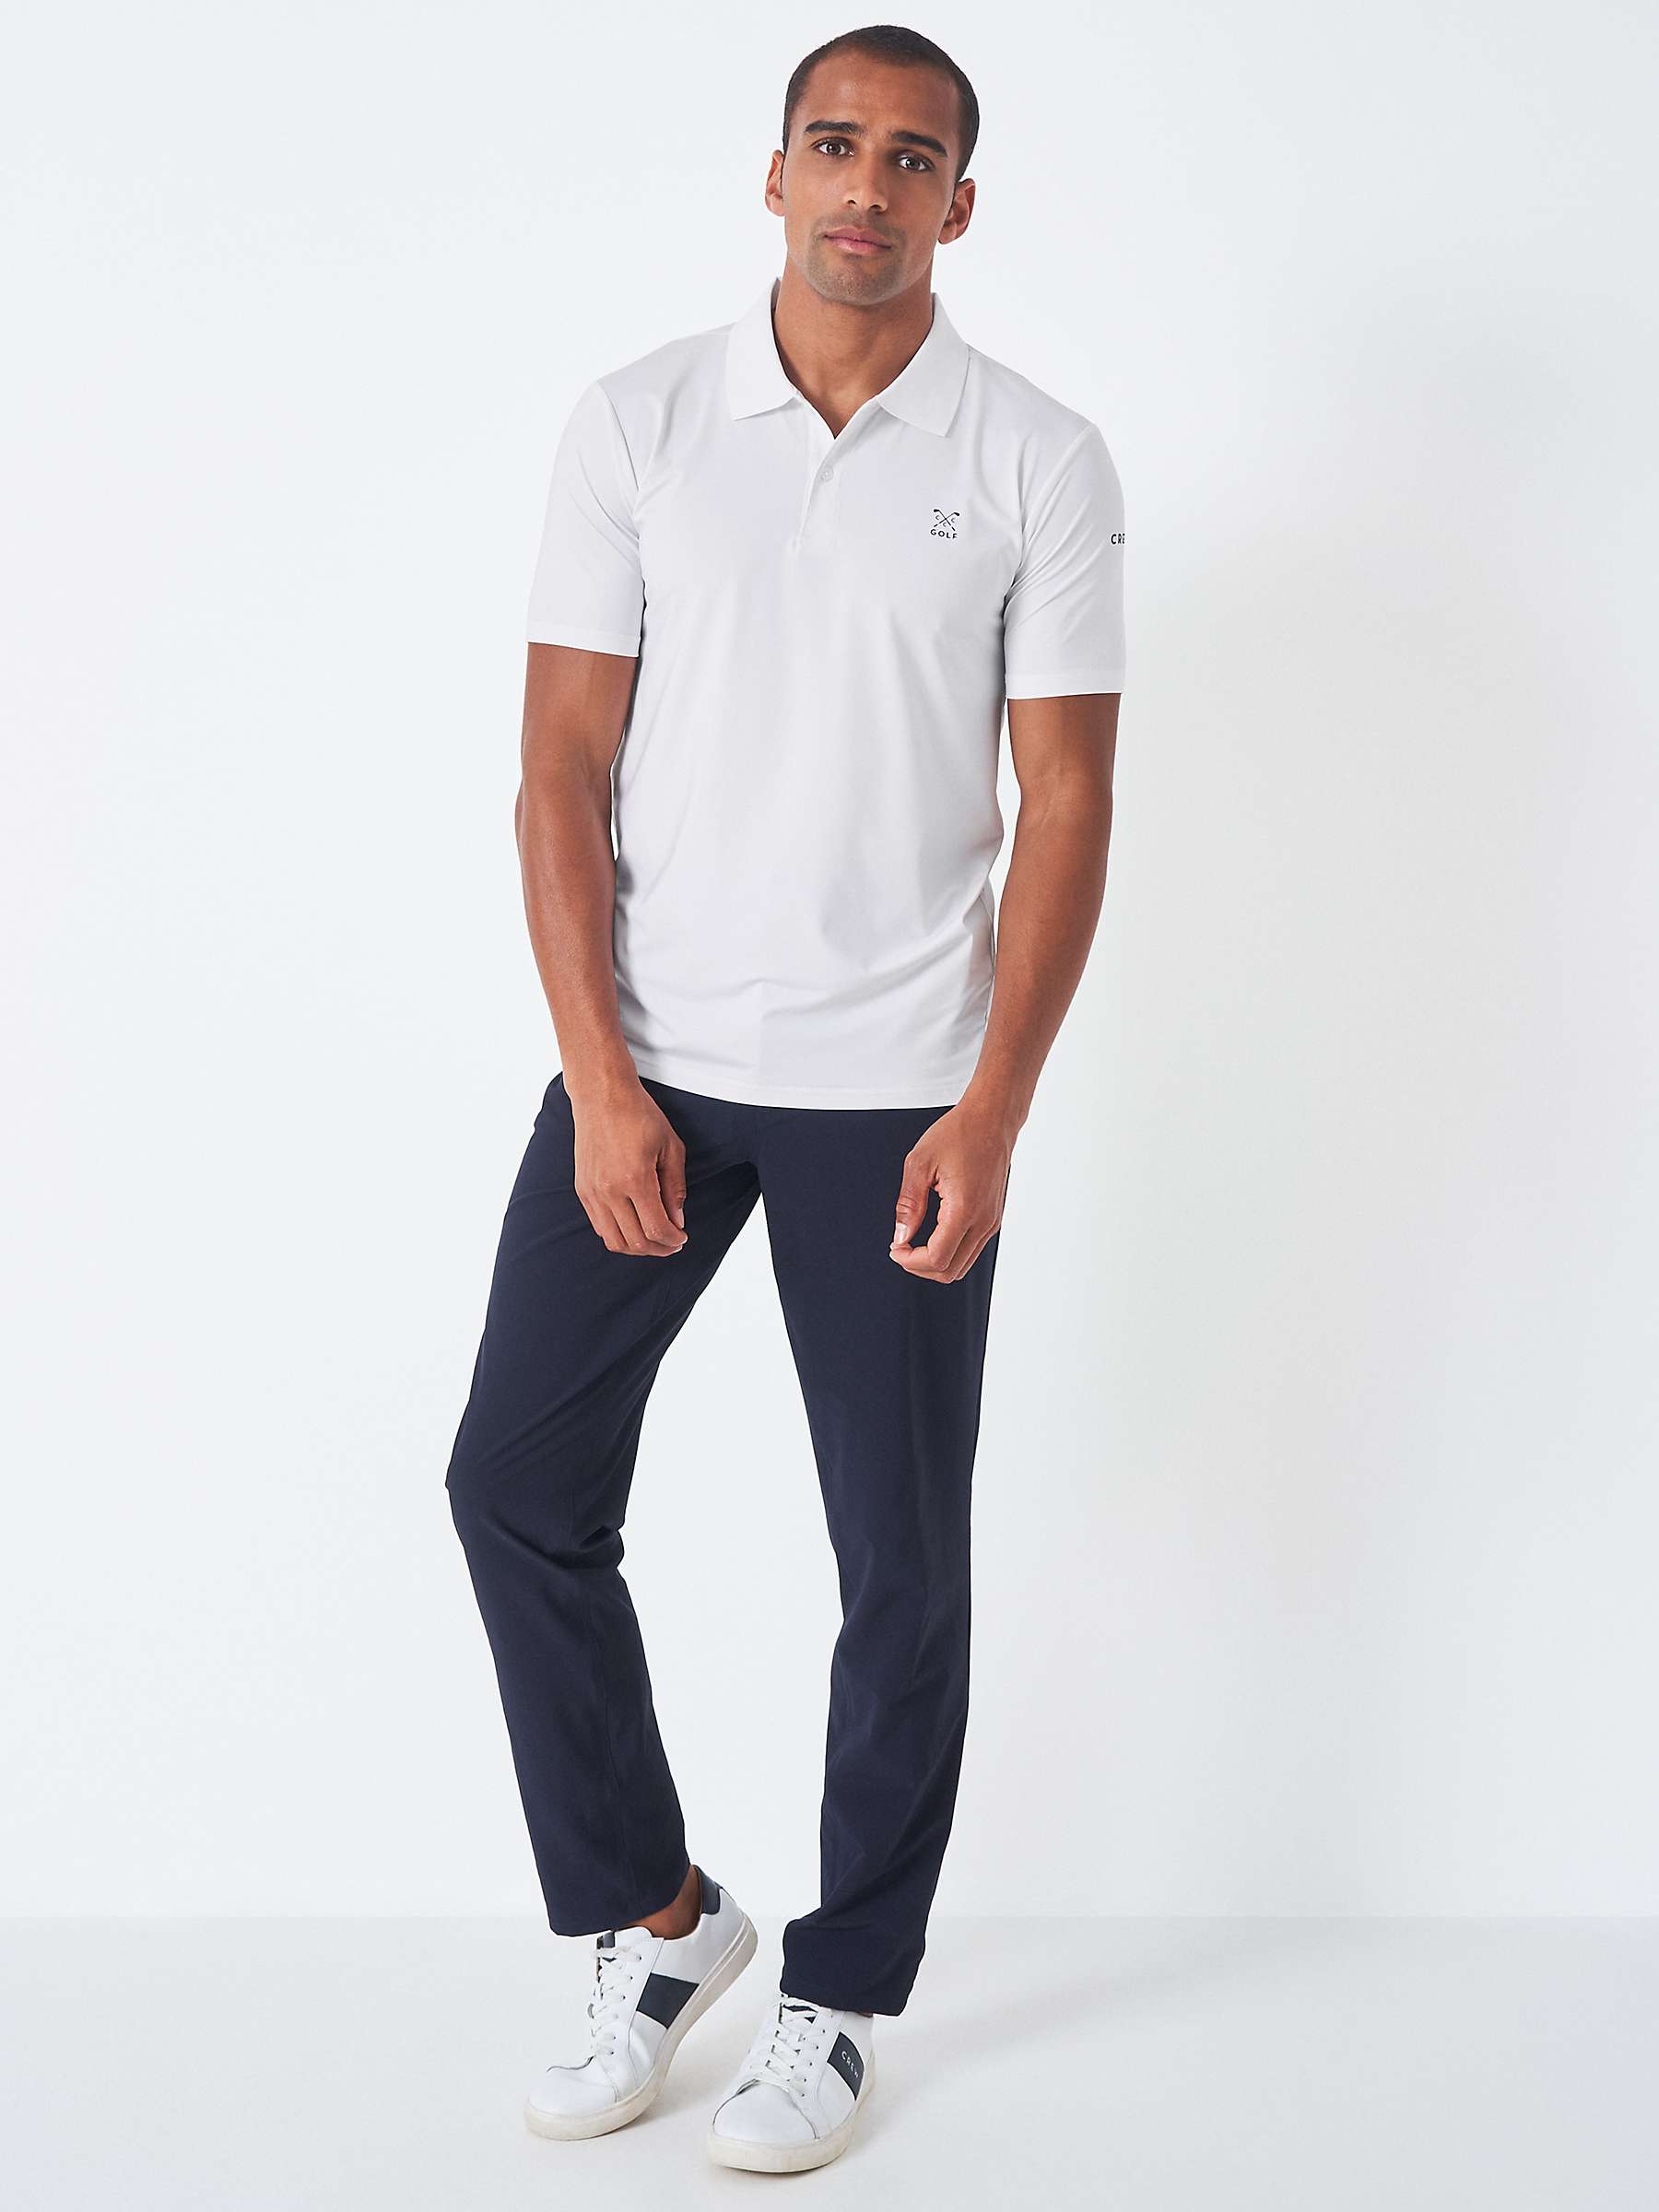 Buy Crew Clothing Smart Stretch Golf Polo Shirt Online at johnlewis.com